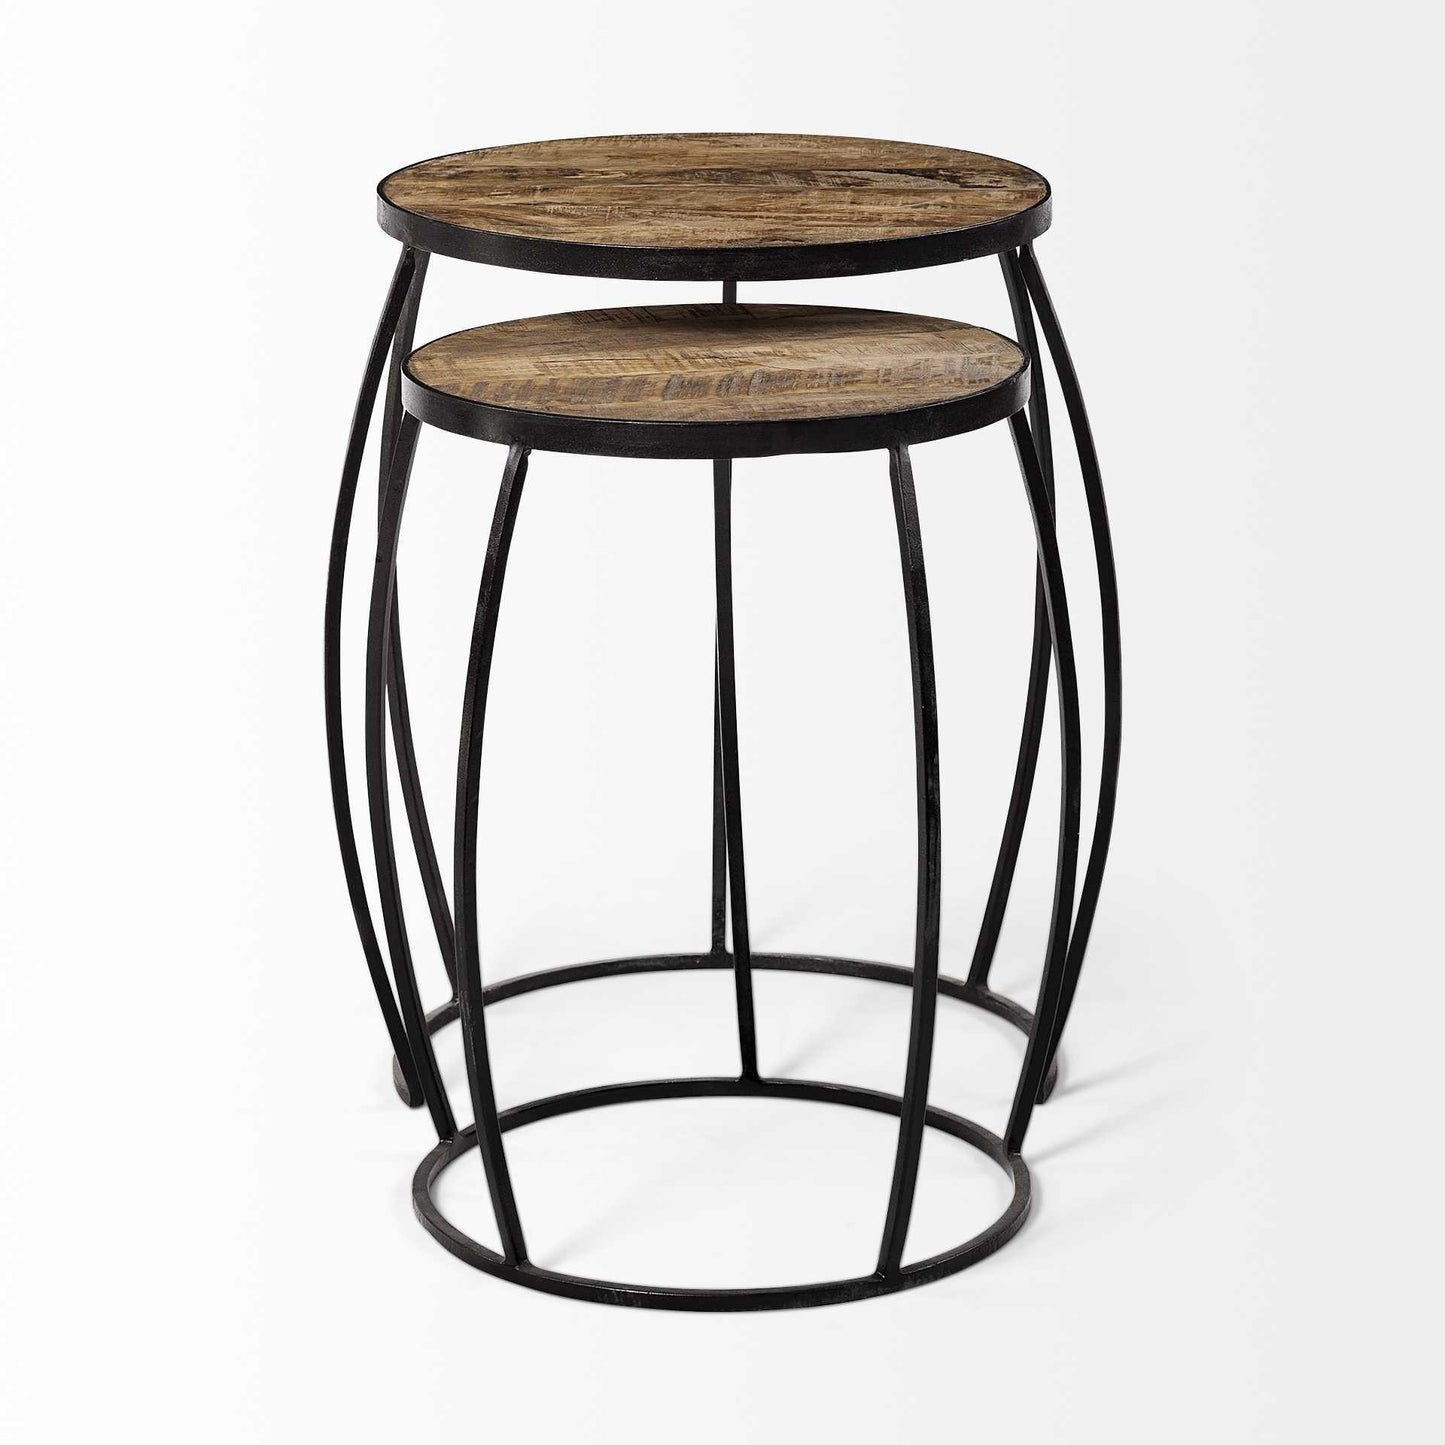 Set of 2 Medium Brown Wooden Round Top Accent Tables with Black Metal Frame Nesting Tables By Homeroots